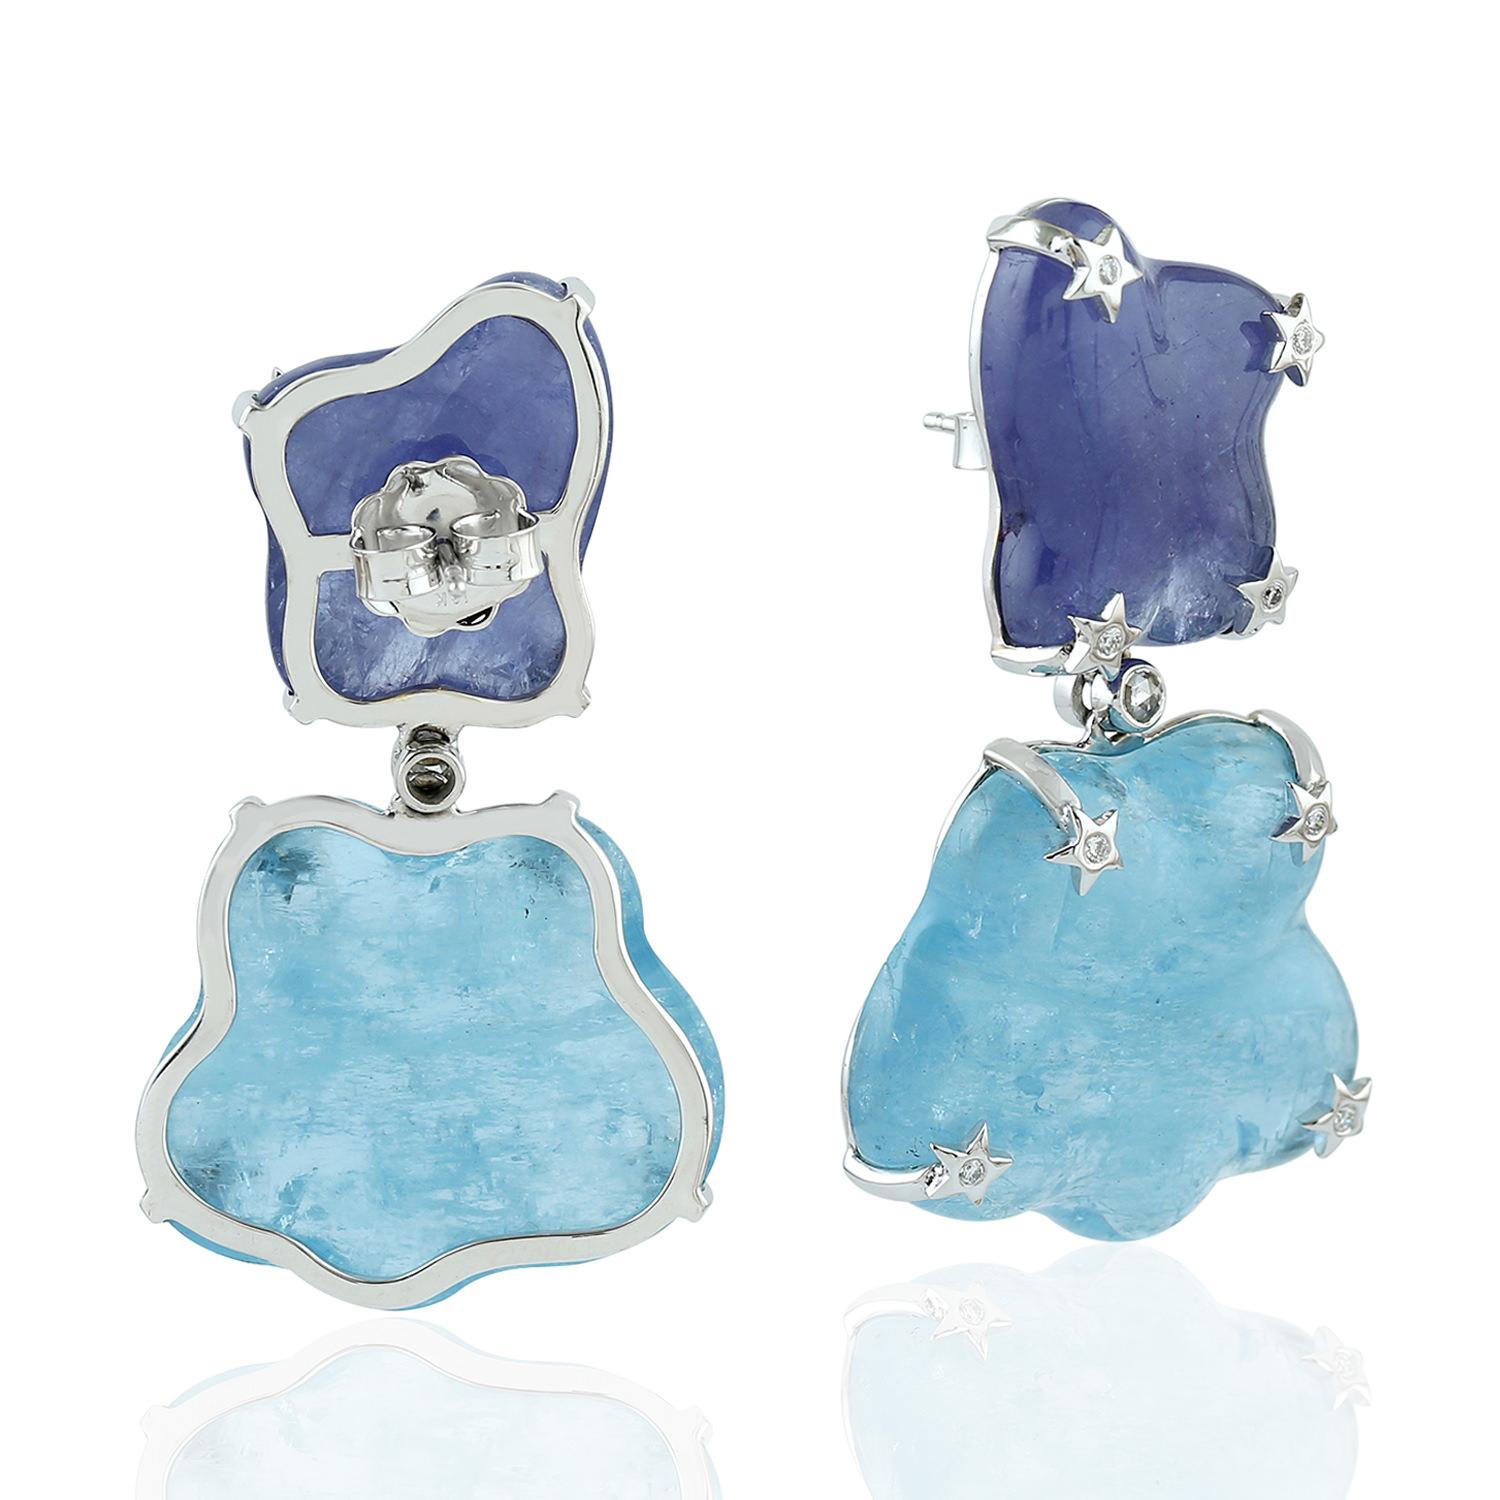 One of a kind this free-form Aquamarine & Tanzanite Earring in 18K white gold with star diamond motifs is like carrying those clouds around you. It's just majestic.

18KT: 11.655gms
Dimond:0.25cts
AQUMARINE: 54.97cts
TANZANITE: 53.76cts